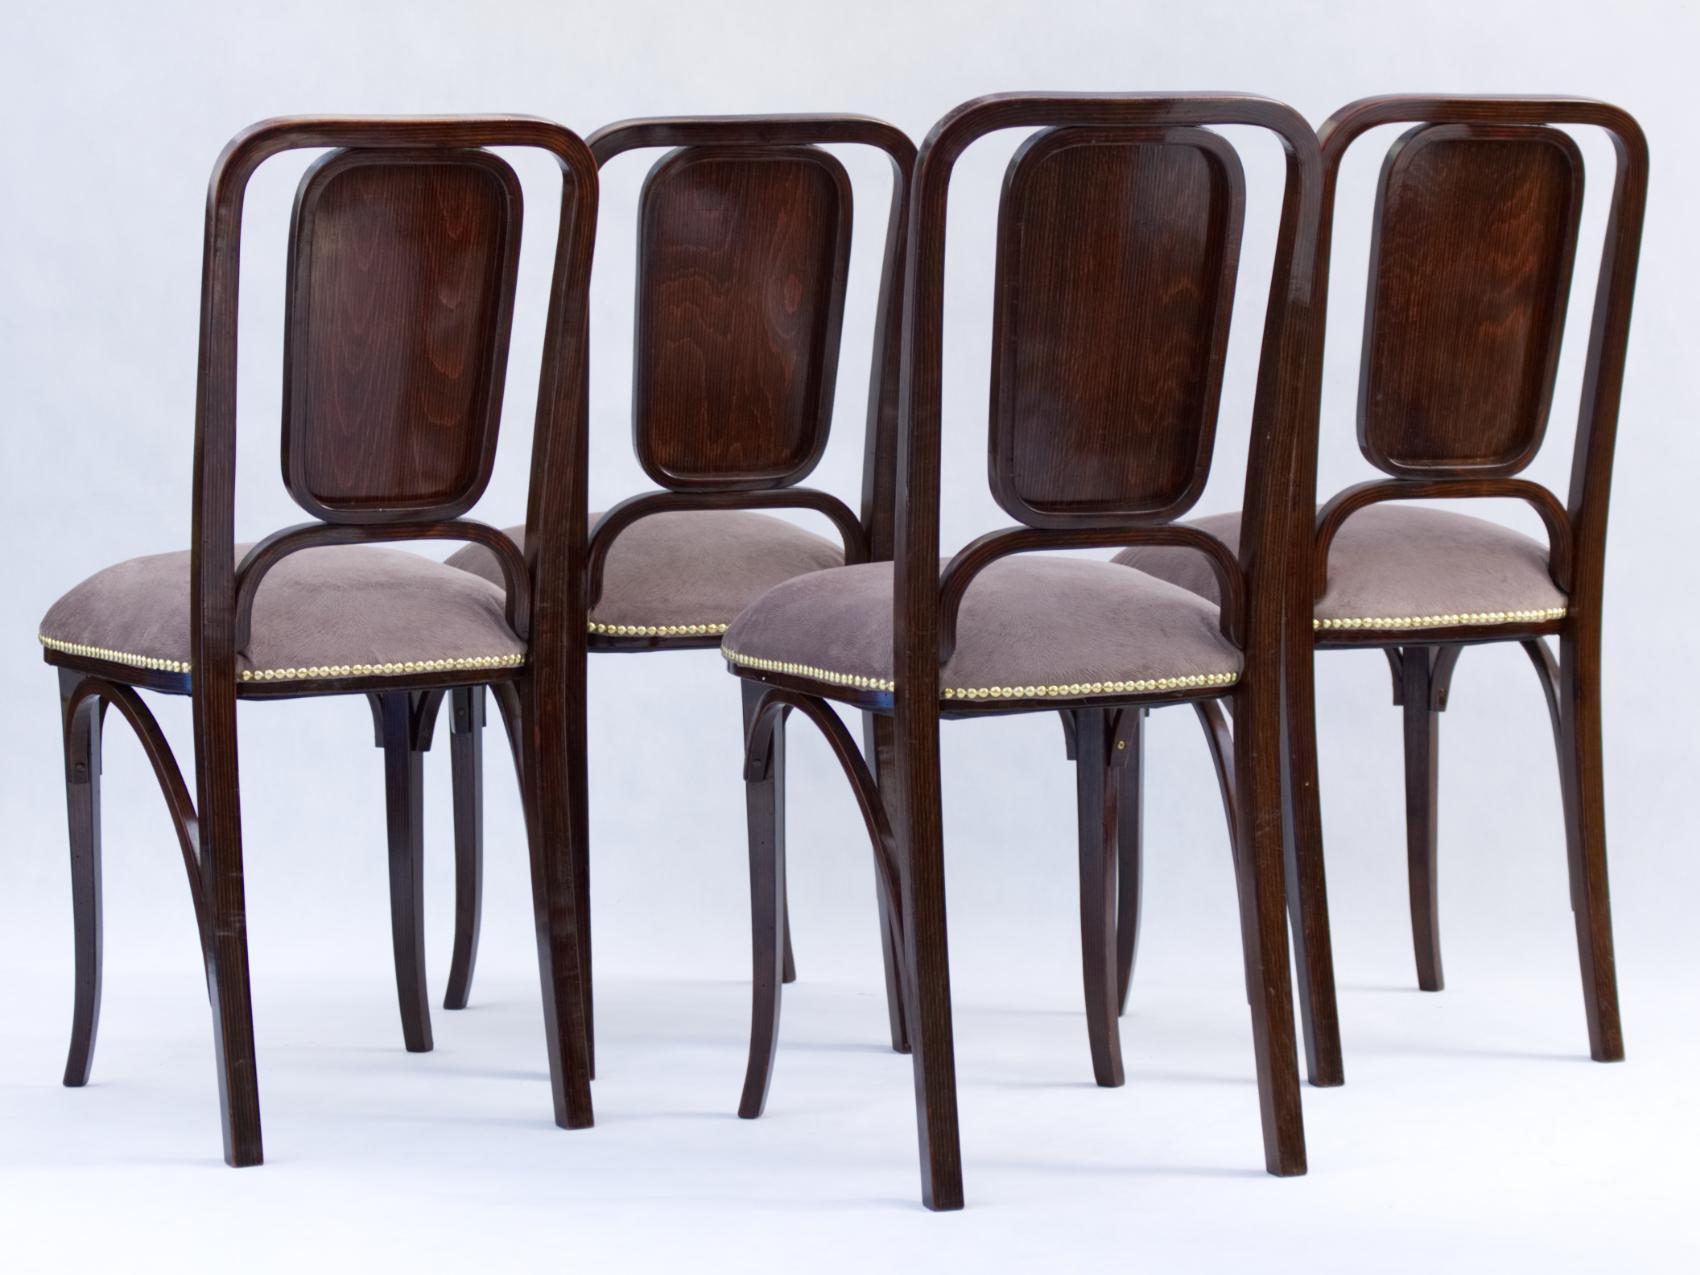 Austrian Art Noveau Bentwood Chairs, Early 20th Century, Circa 1905 For Sale